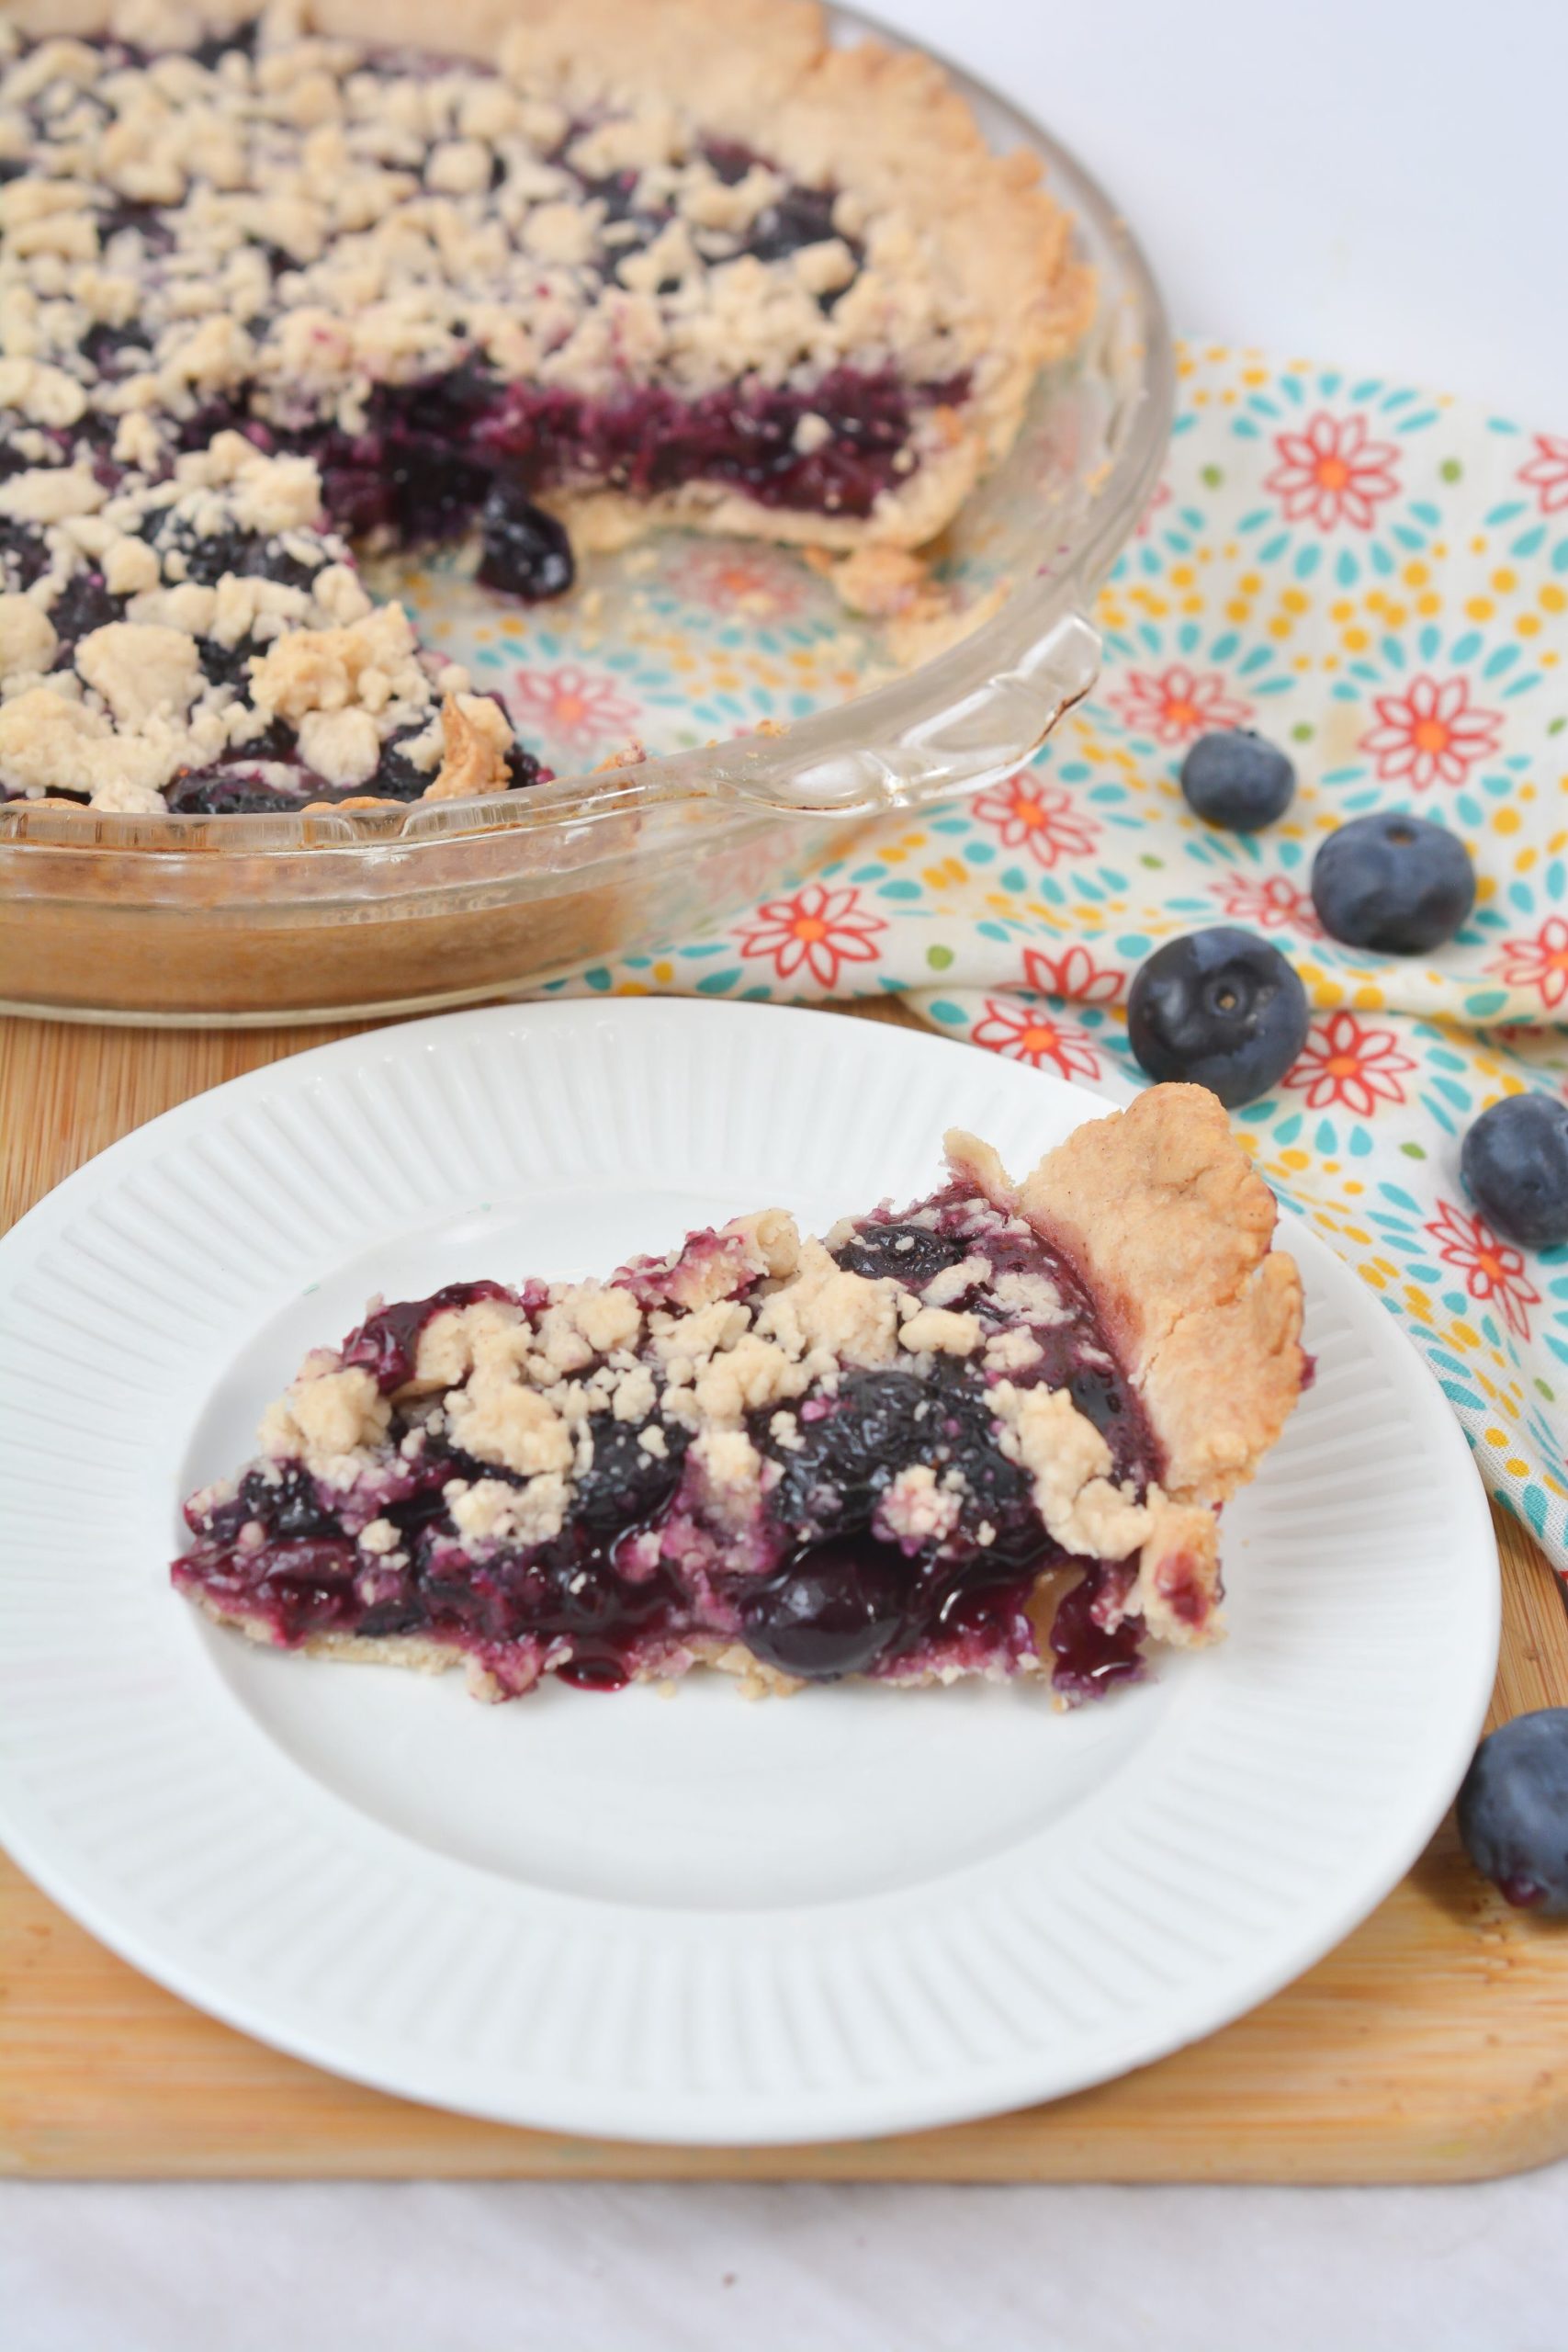 A side view of blueberry crumb pie.